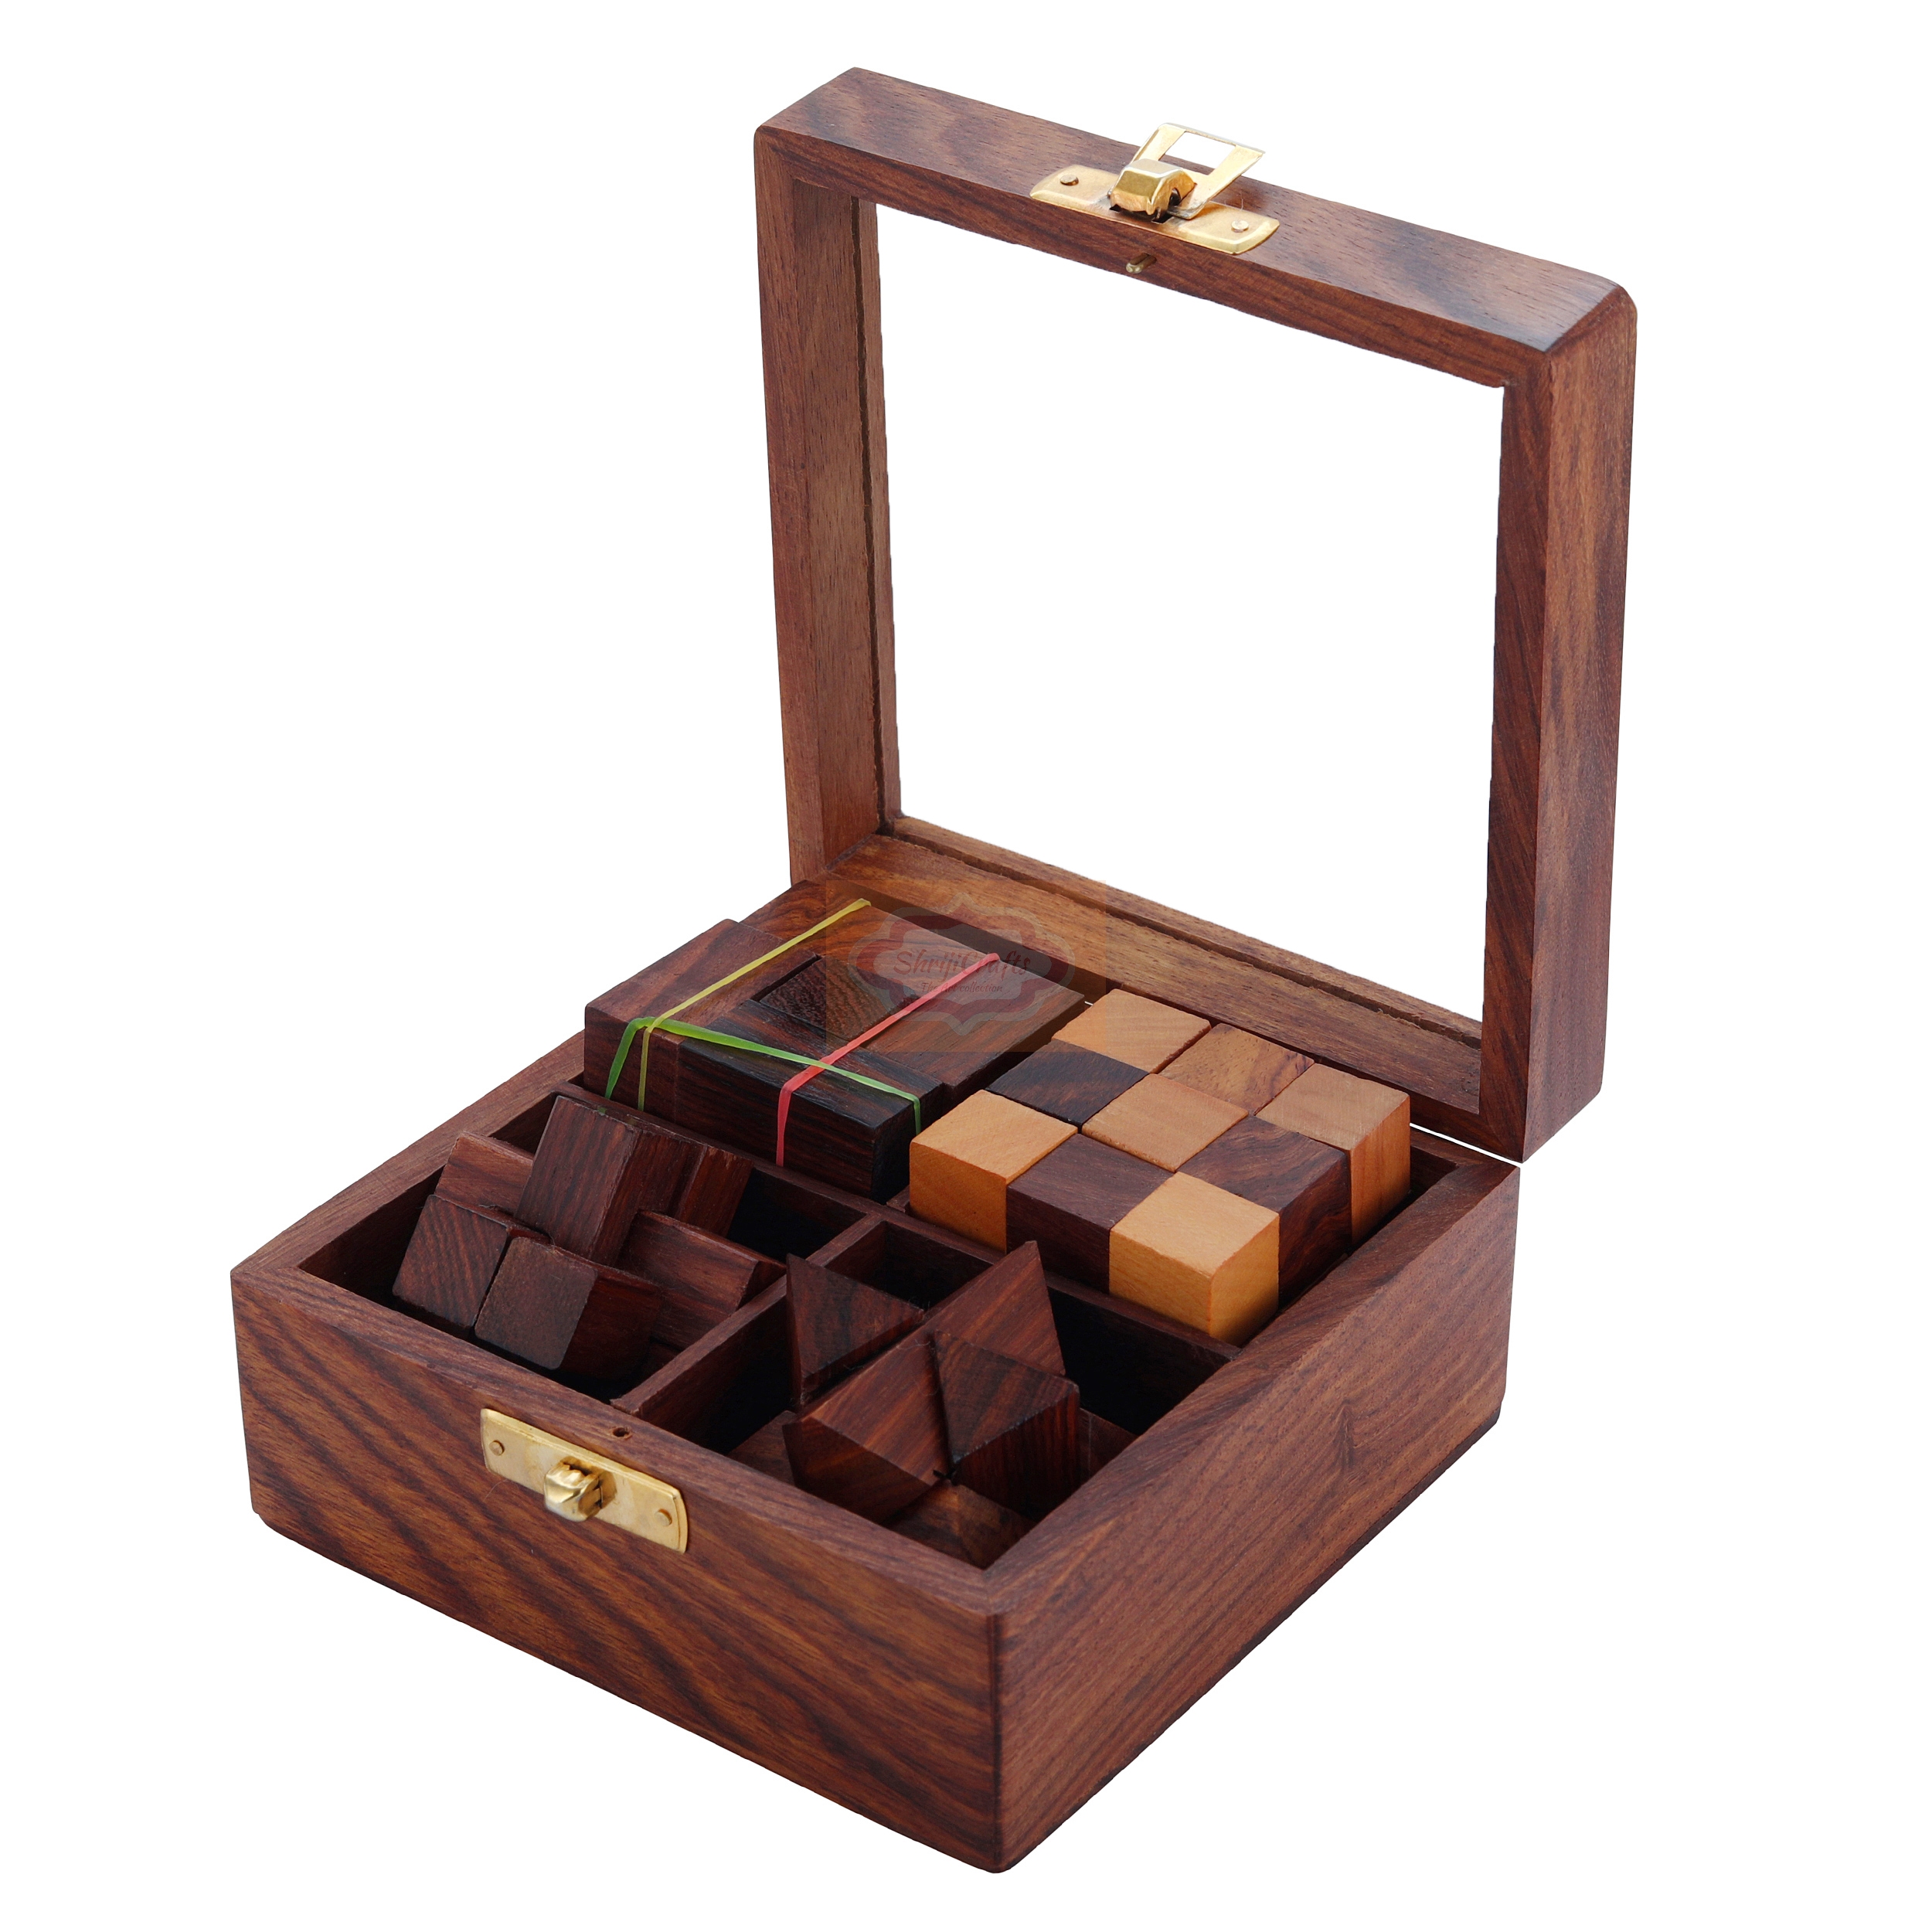 Shrijicrafts | ShrijiCrafts 4-in-One Wooden Cube Puzzle Games Set 3D Puzzles Brain Teaser Game for Kids and Adults 0